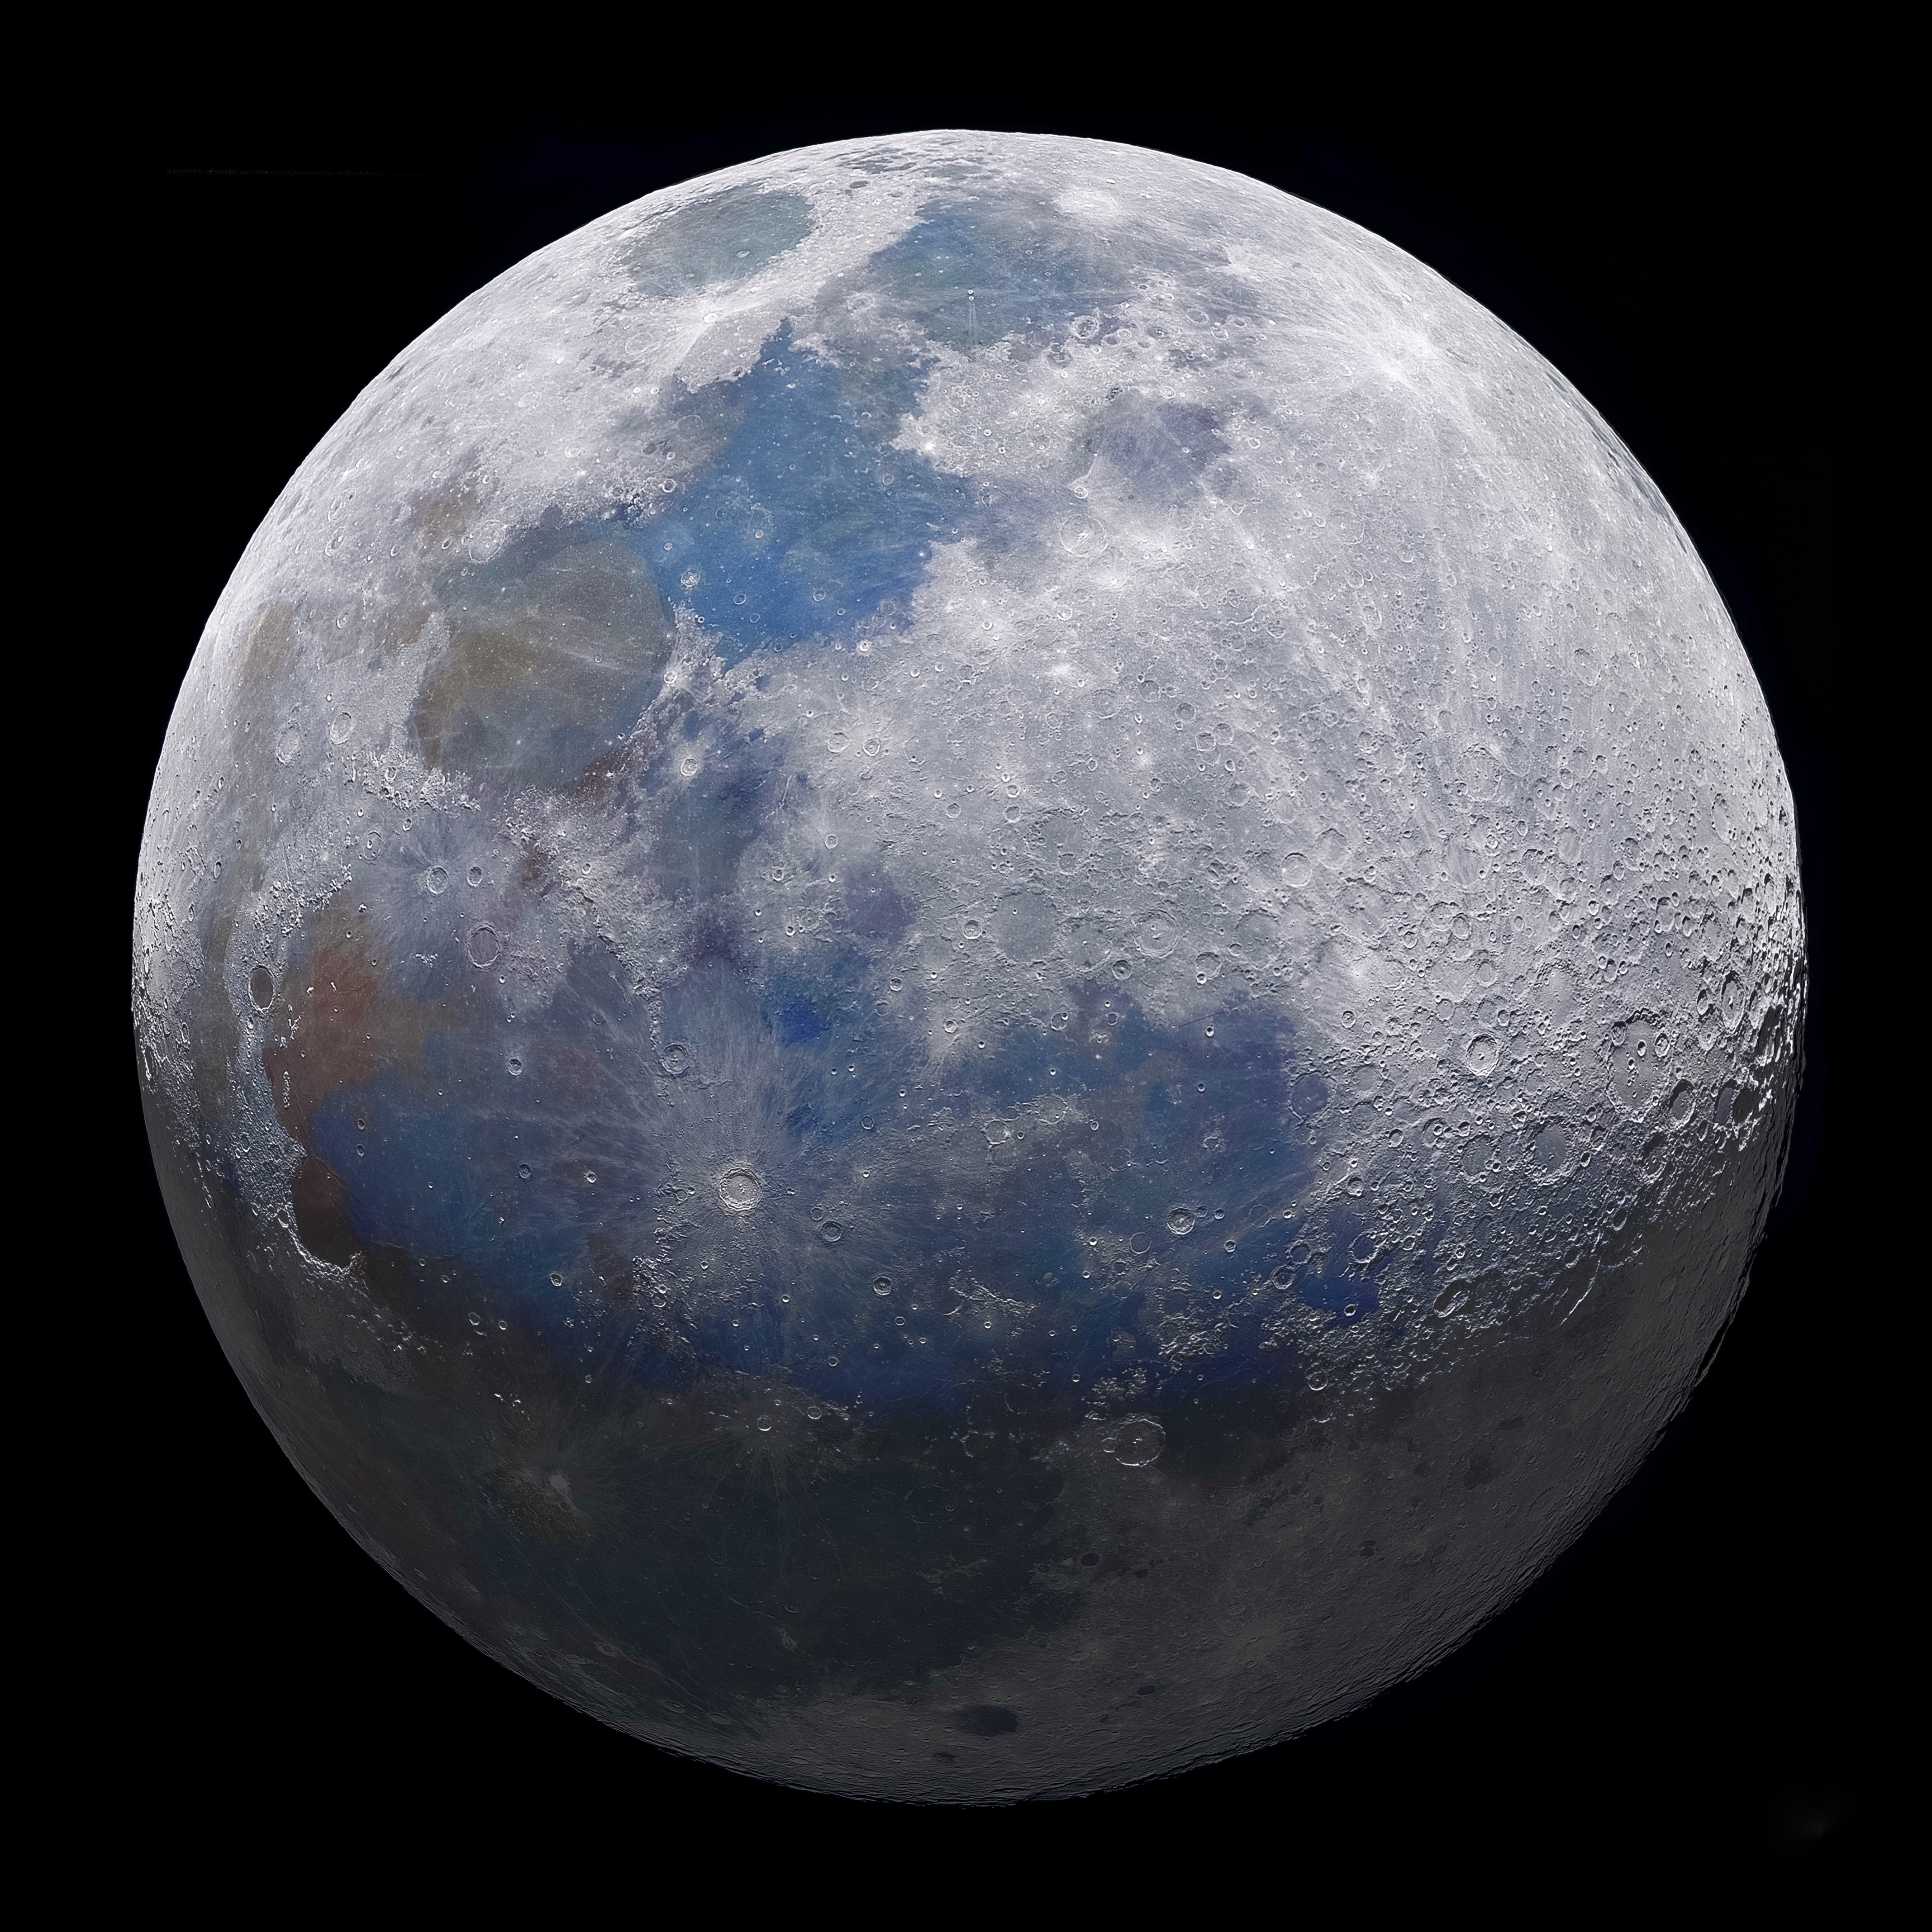 This is a composite of an image of the Moon 78% illuminated and an image of the full Moon. Assembling close-up shots to create a mosaic of the whole Moon is complex as the perspective changes slightly during a lunar orbit.